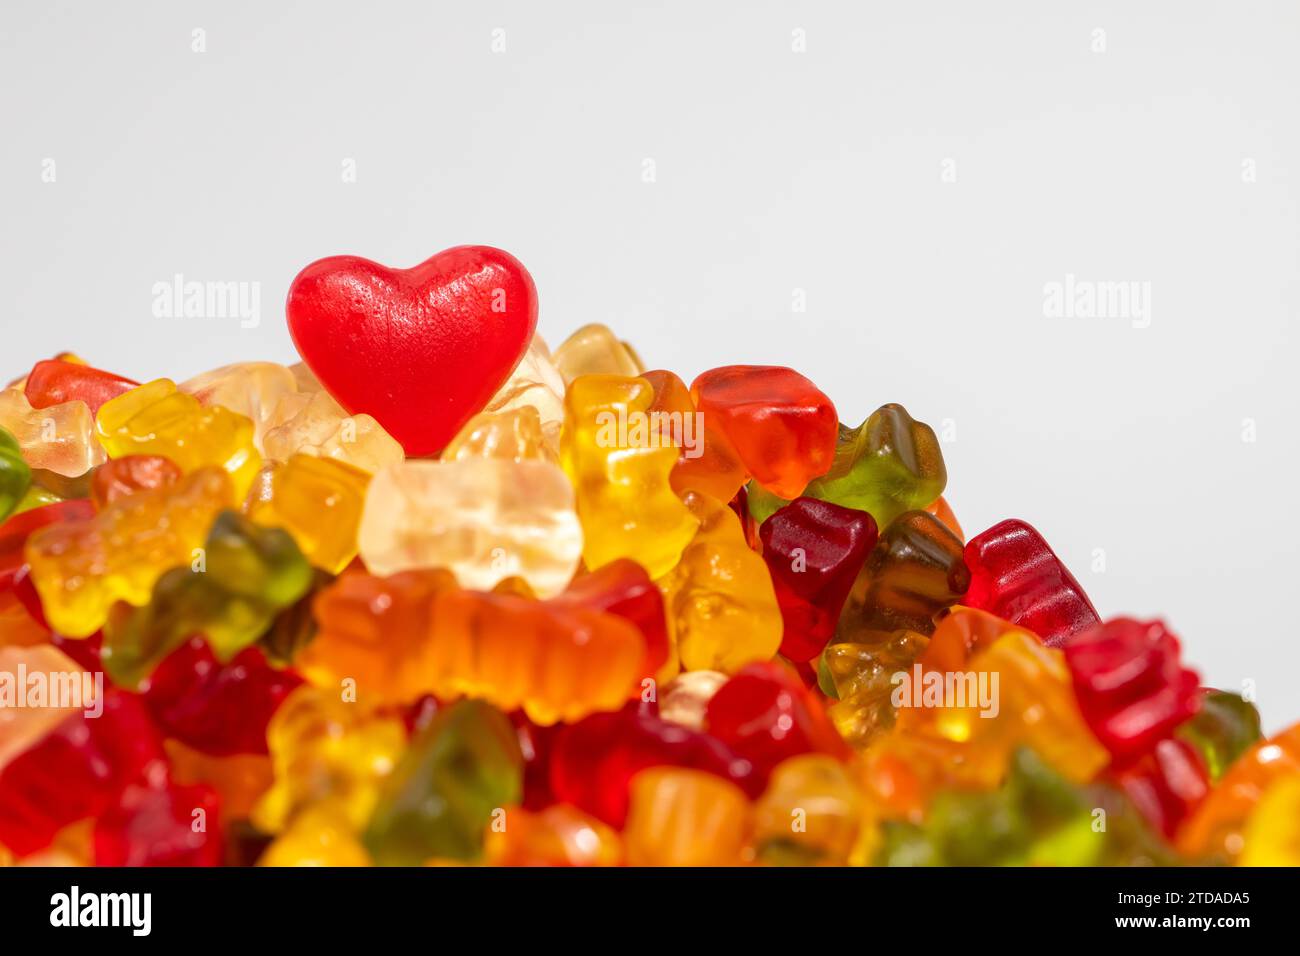 Red Heart on Delicious Pile of Colorful Gummy Bears Candy on White Background Stock Photo